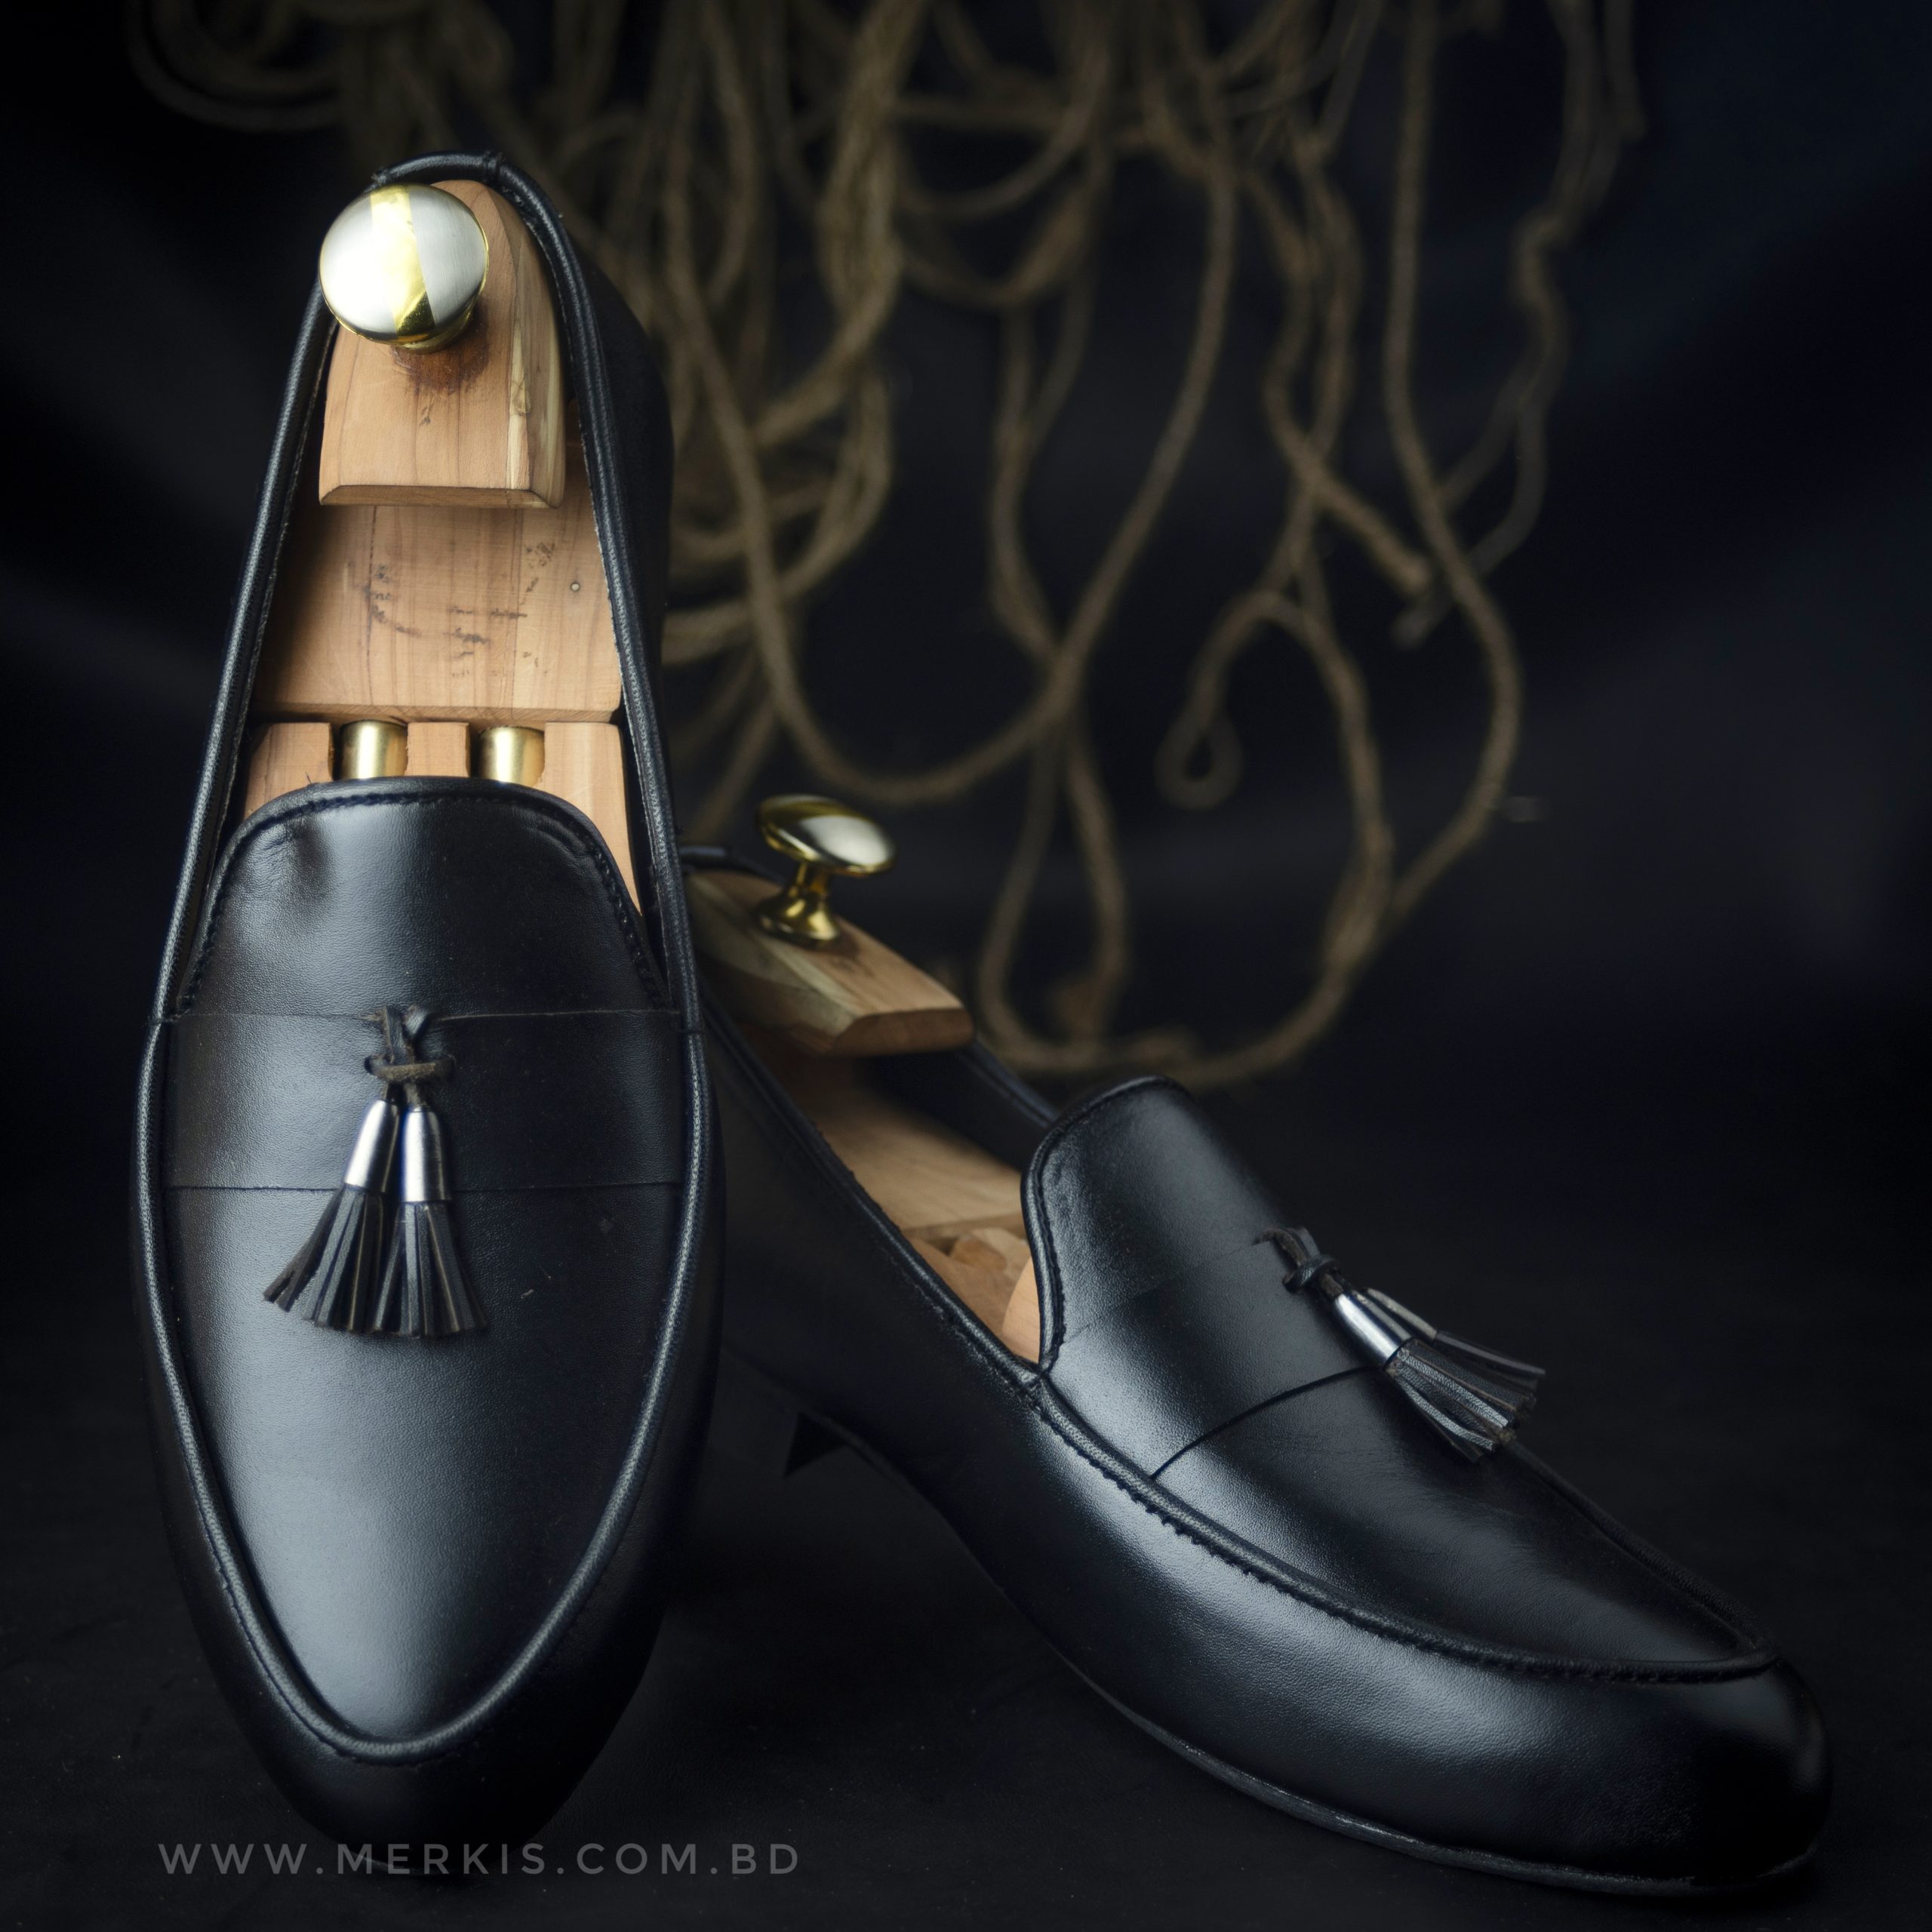 Awesome tassel loafer shoes at best price range in Bangladesh